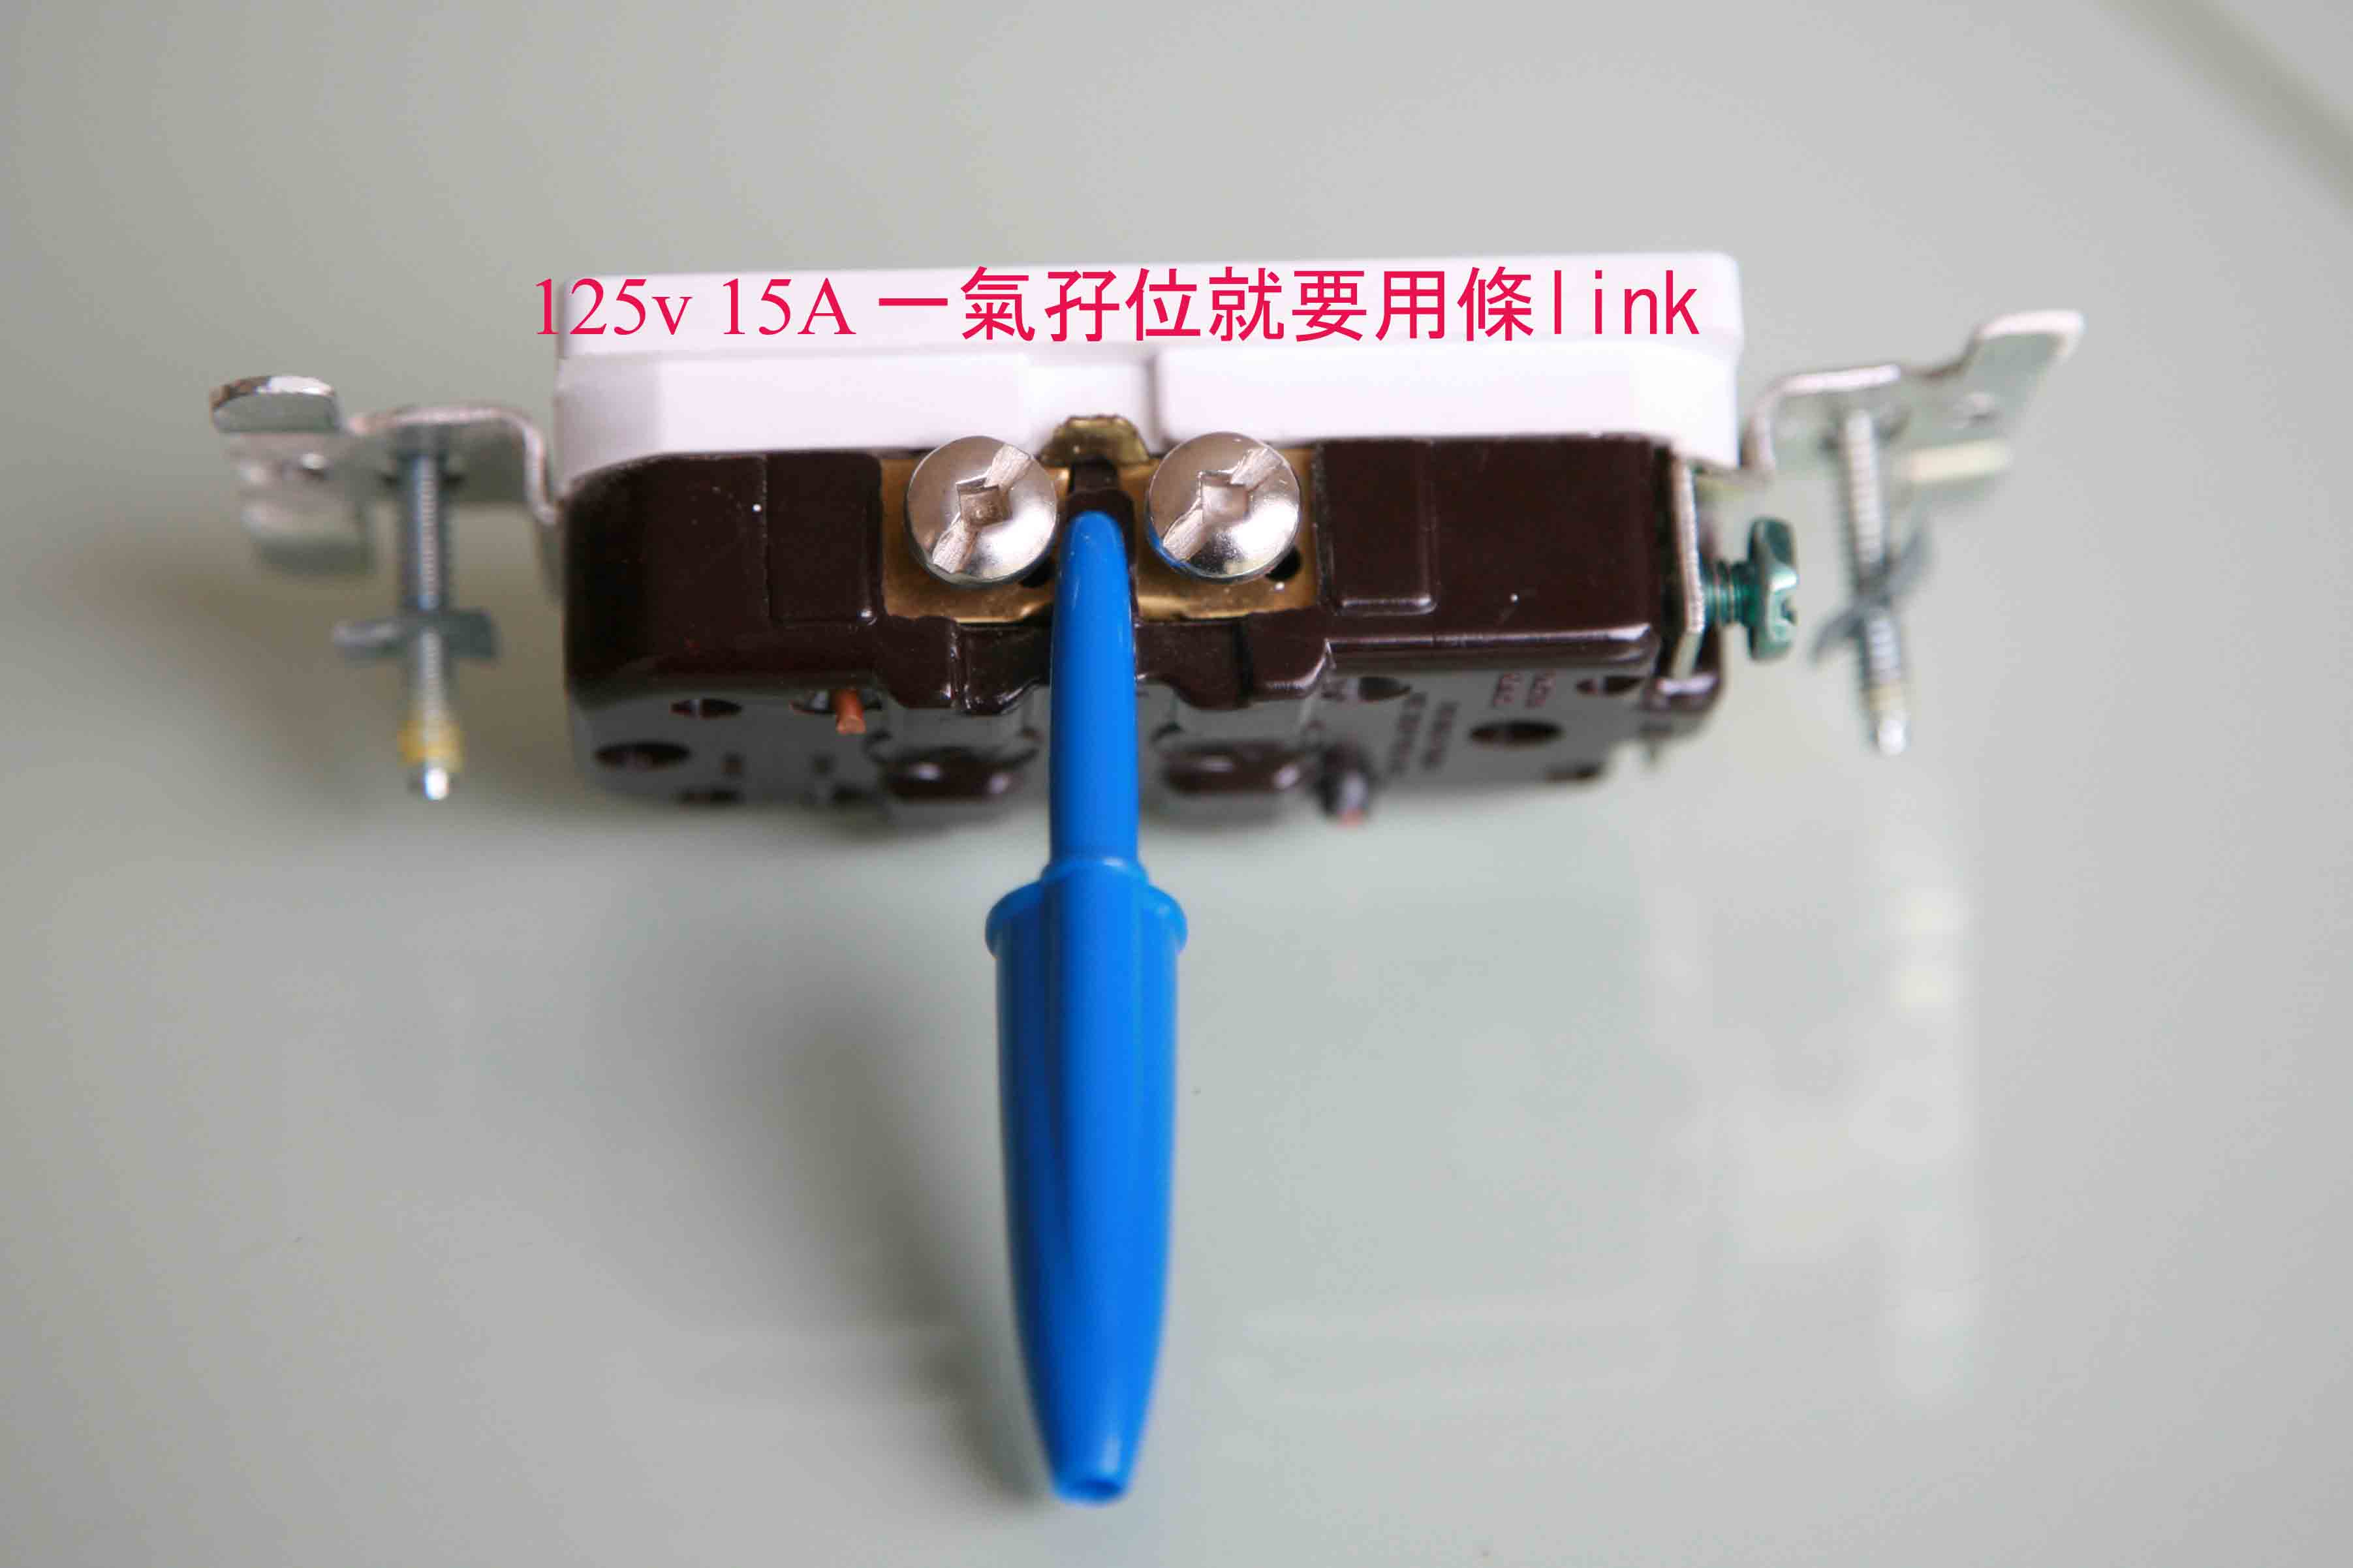 15A with link.jpg